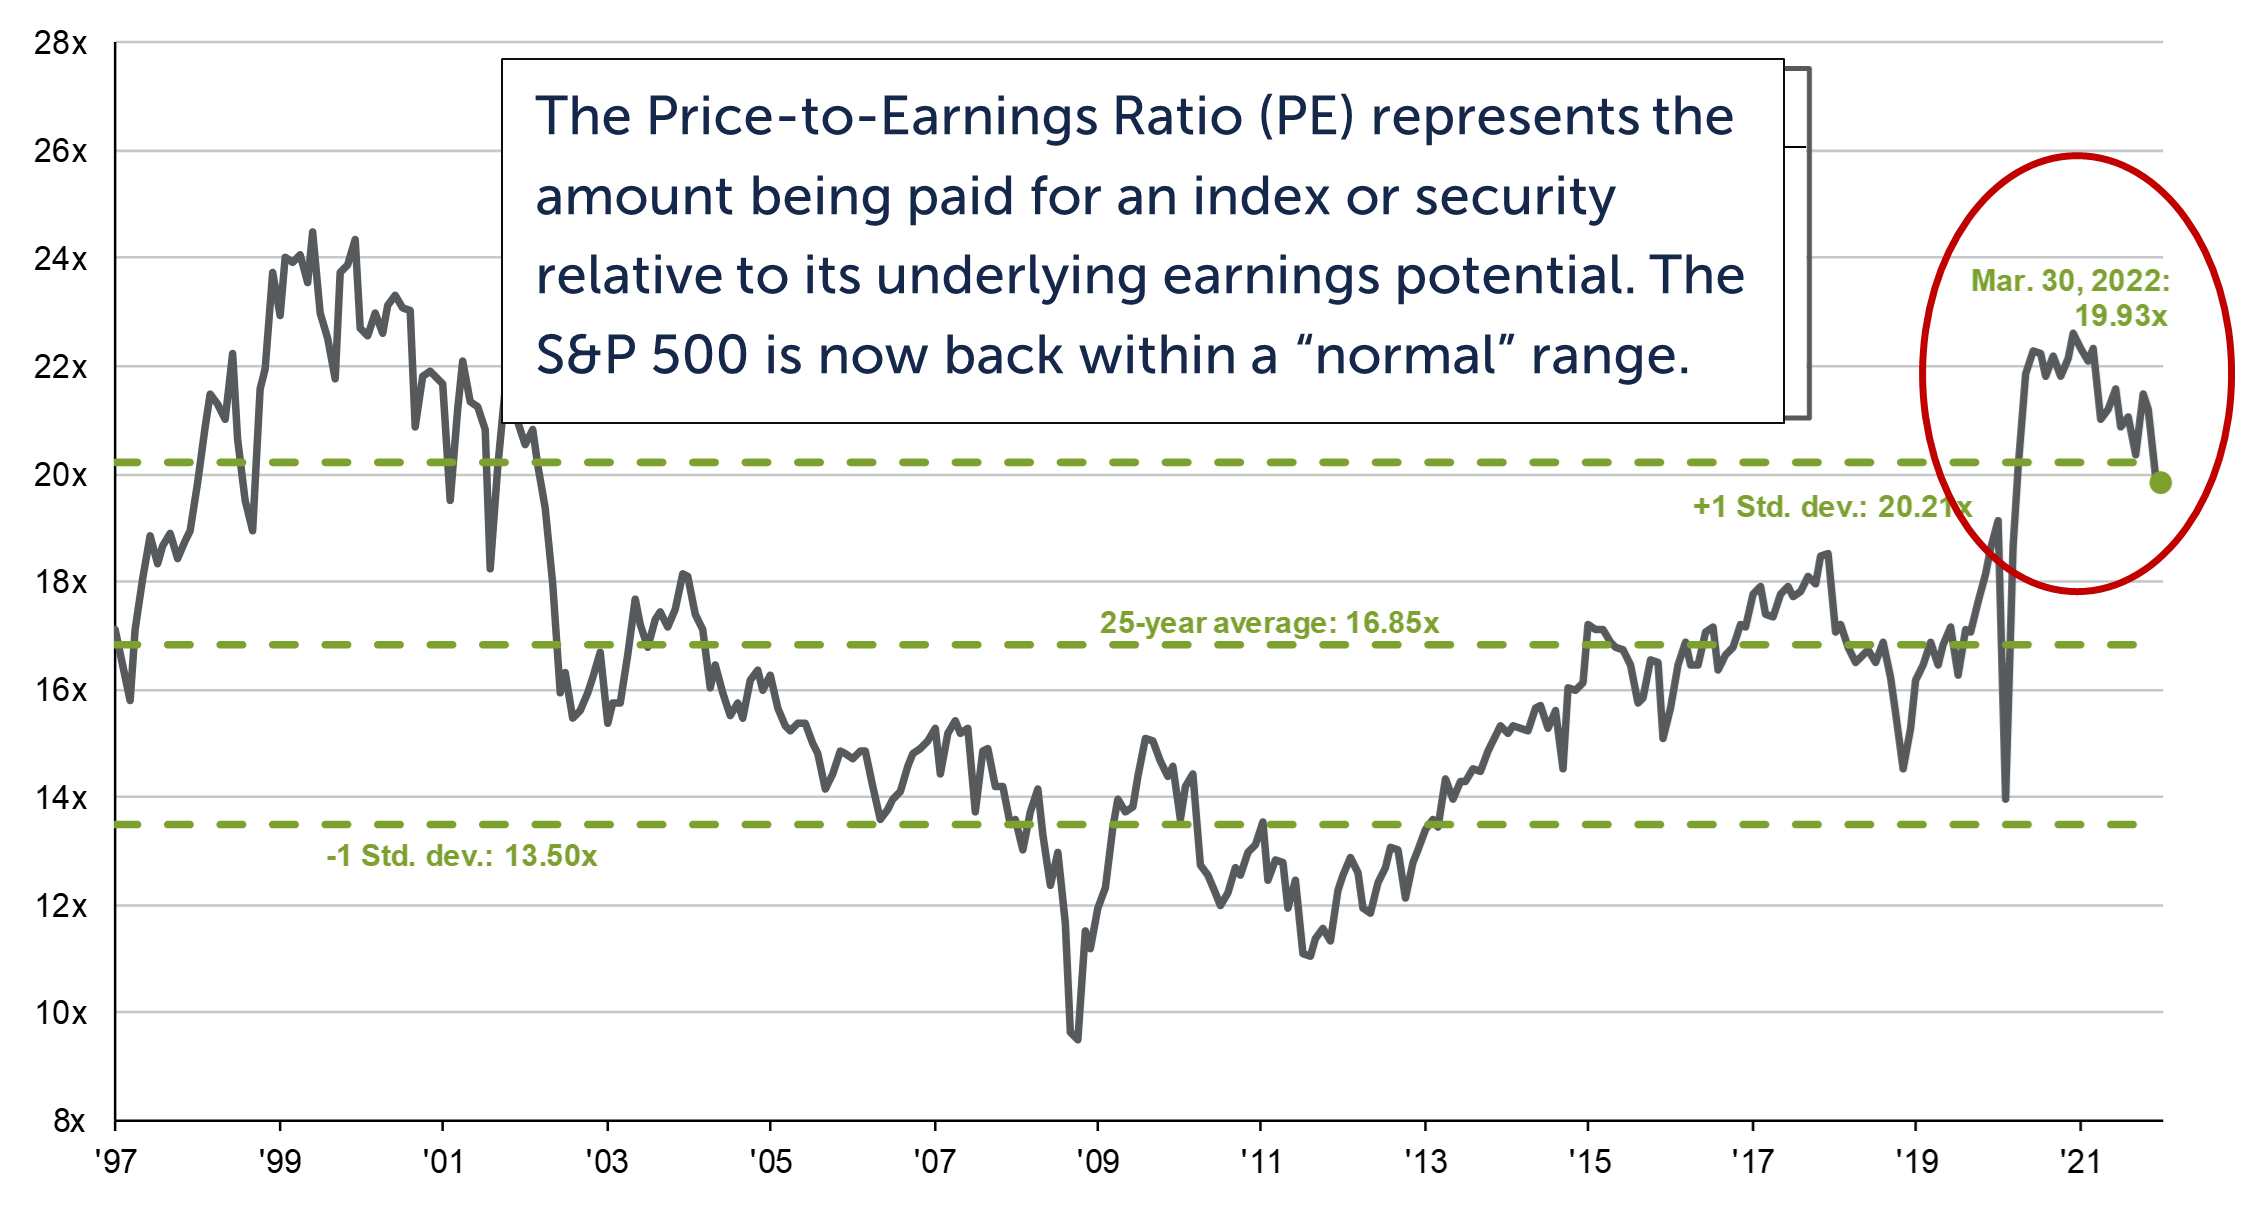 Line graph depicting S&P 500 Price-to-Expected Earnings